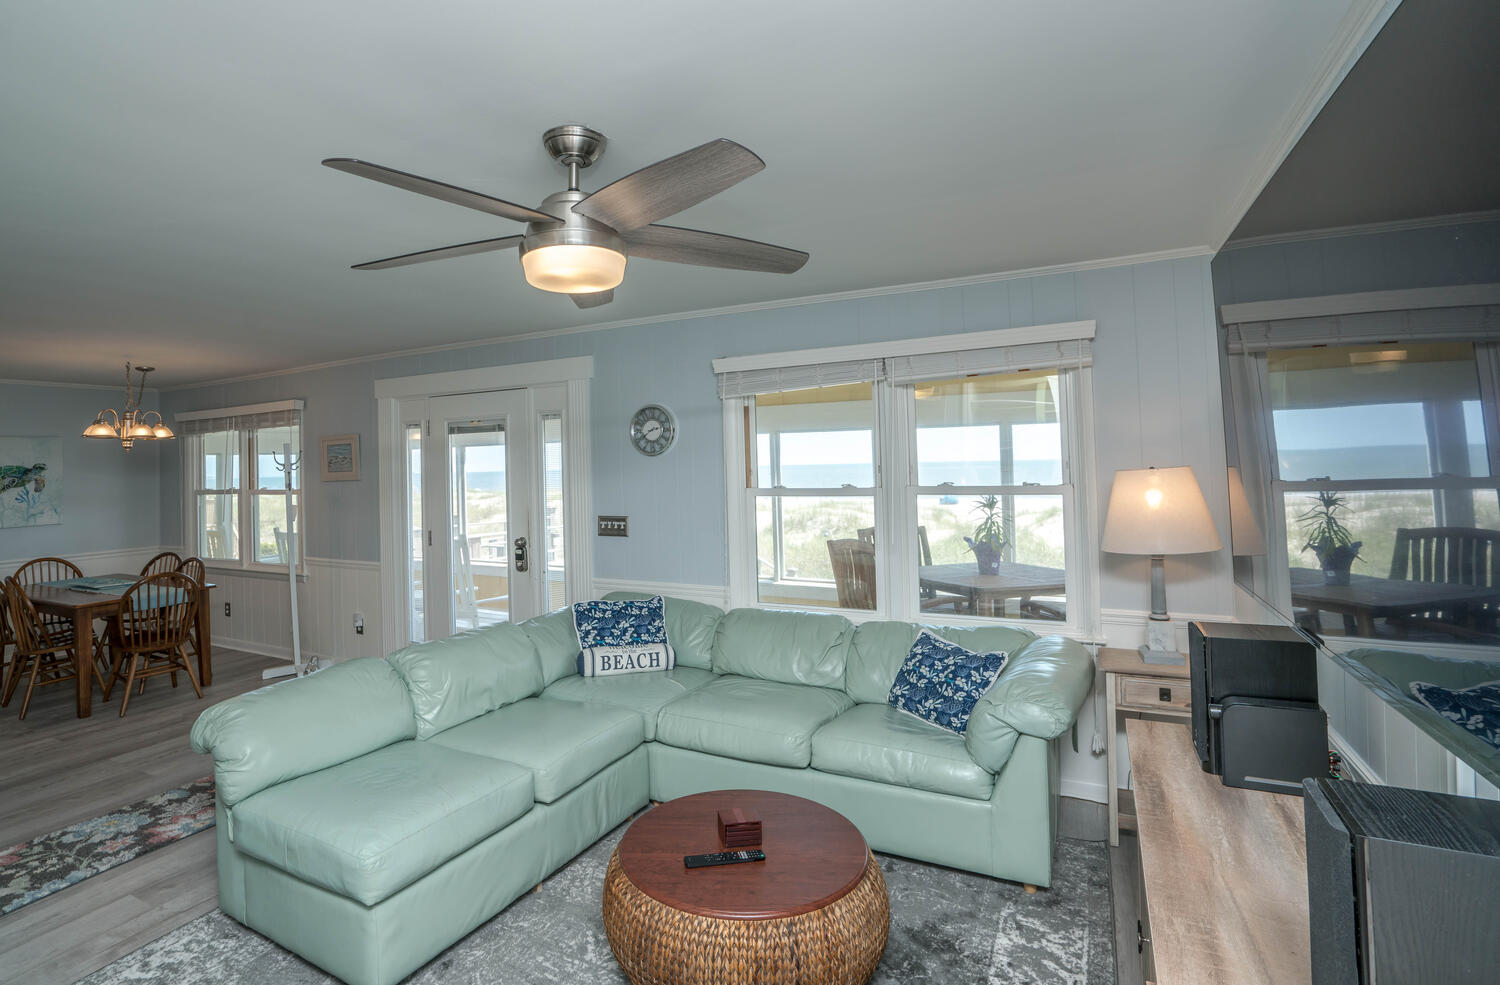 Property Image 2 - Pet friendly private ocean front cottage nestled in peaceful Caswell Beach.  Running Down A Dream